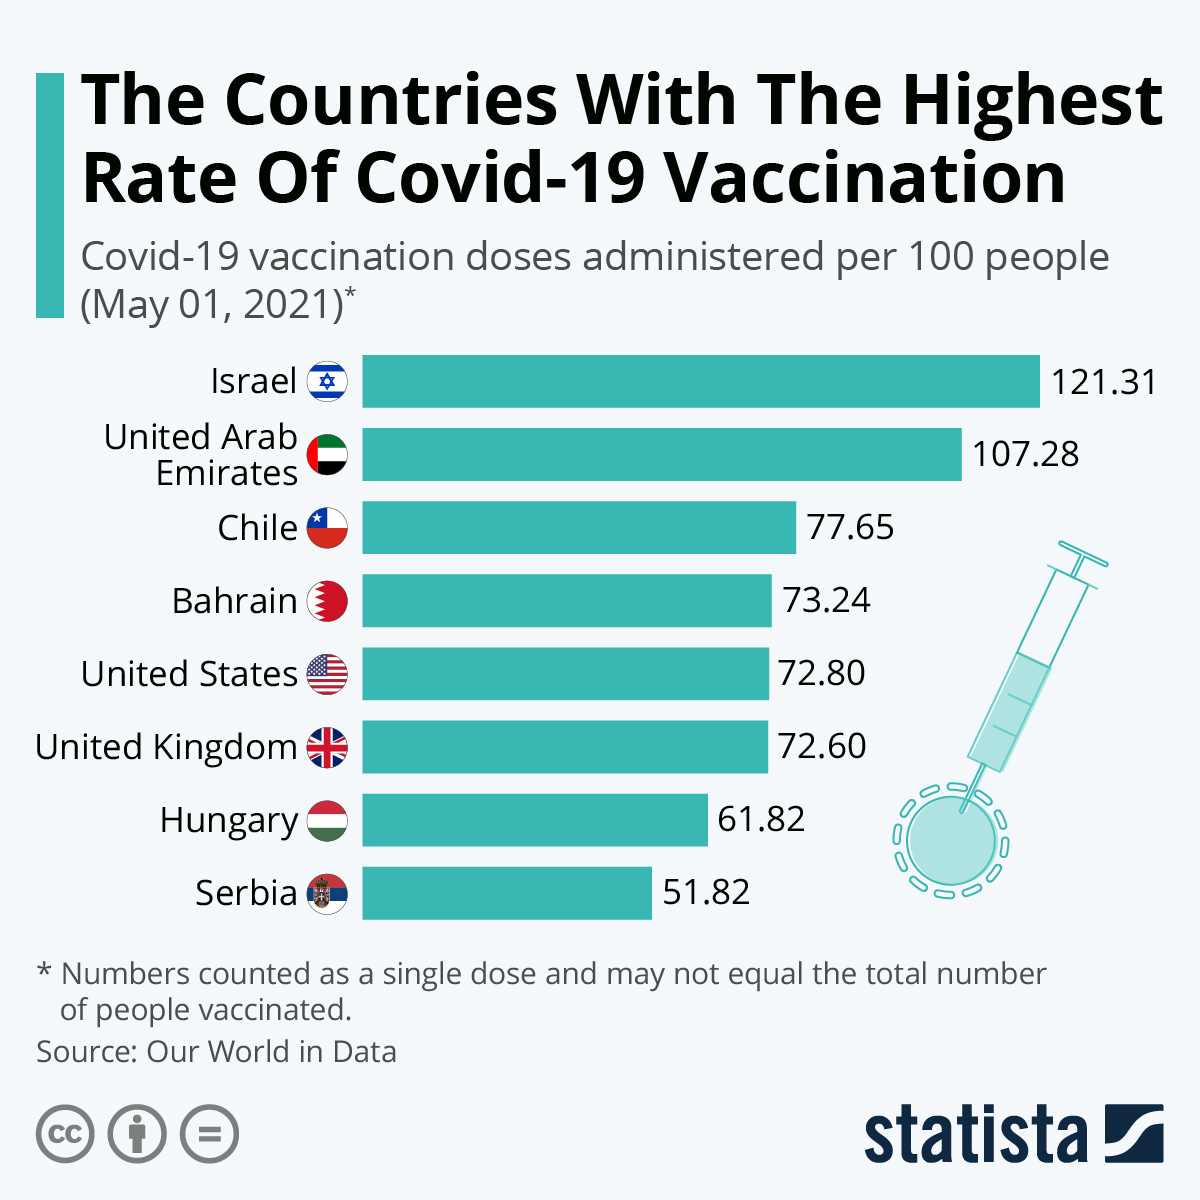 The Countries With The Highest Rate of Covid-19 Vaccination